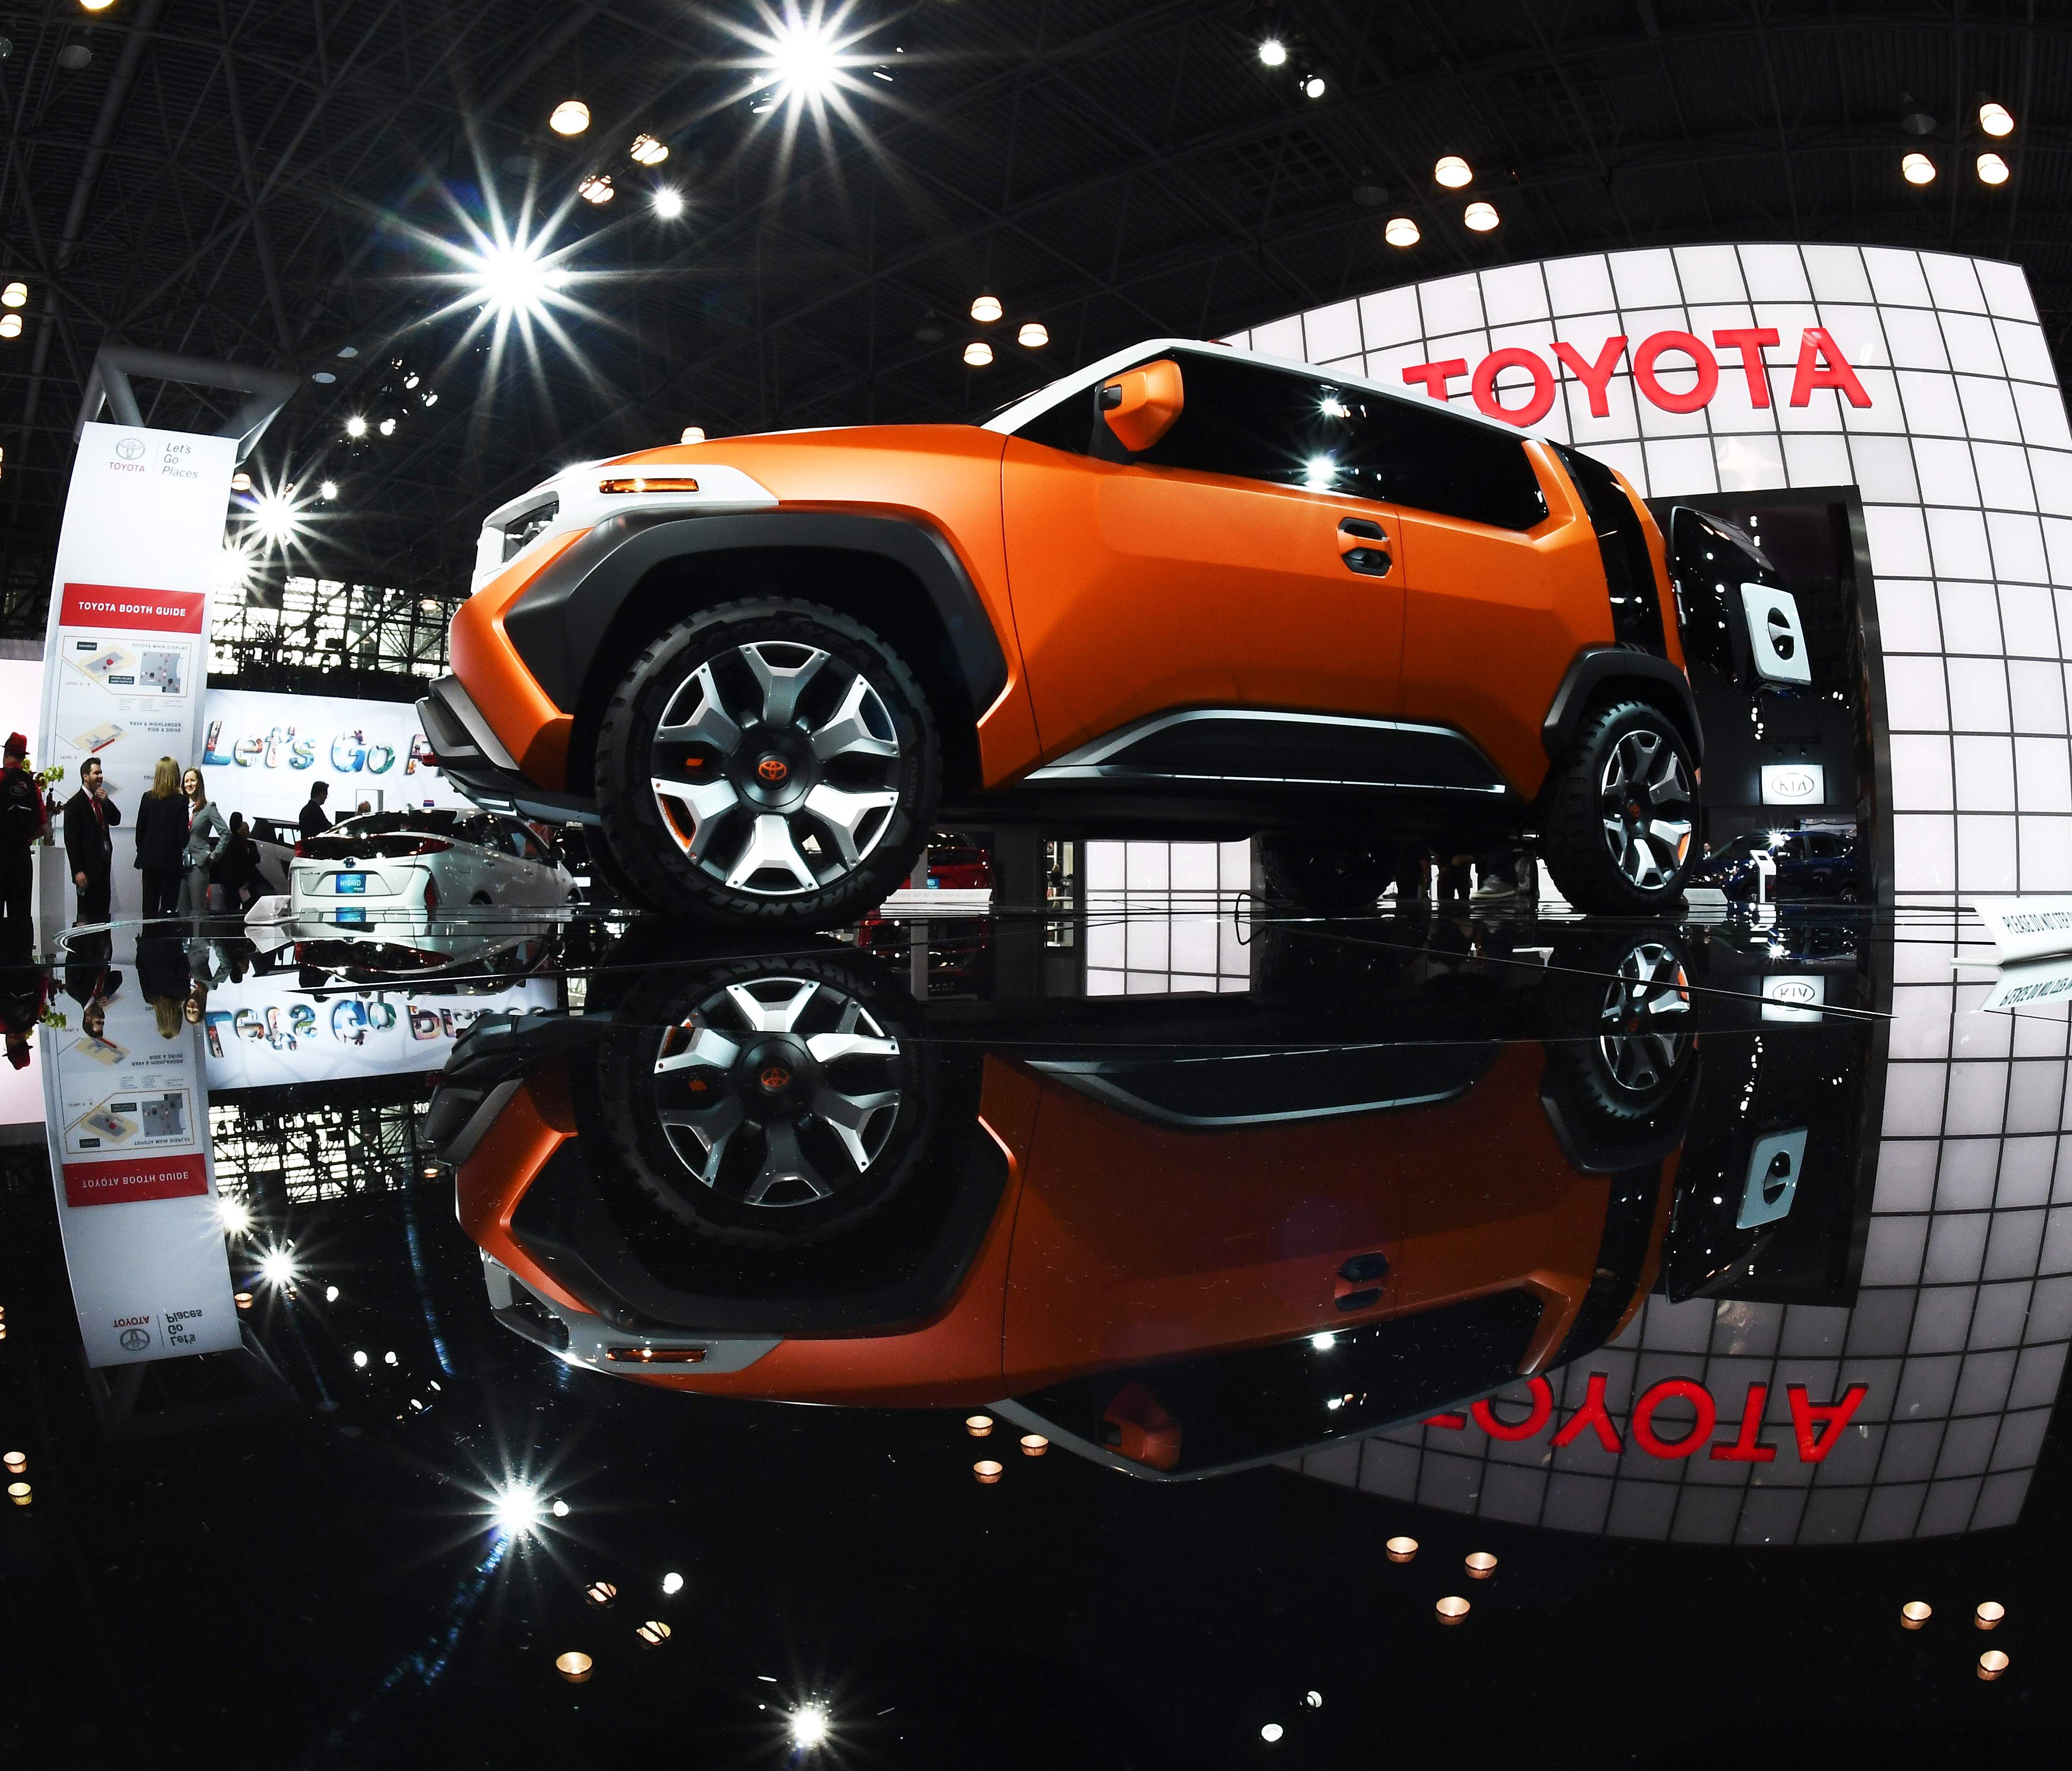 The Toyota FT-4X concept car is displayed during the New York International Auto Show at the Javits center in New York on April 13, 2017.